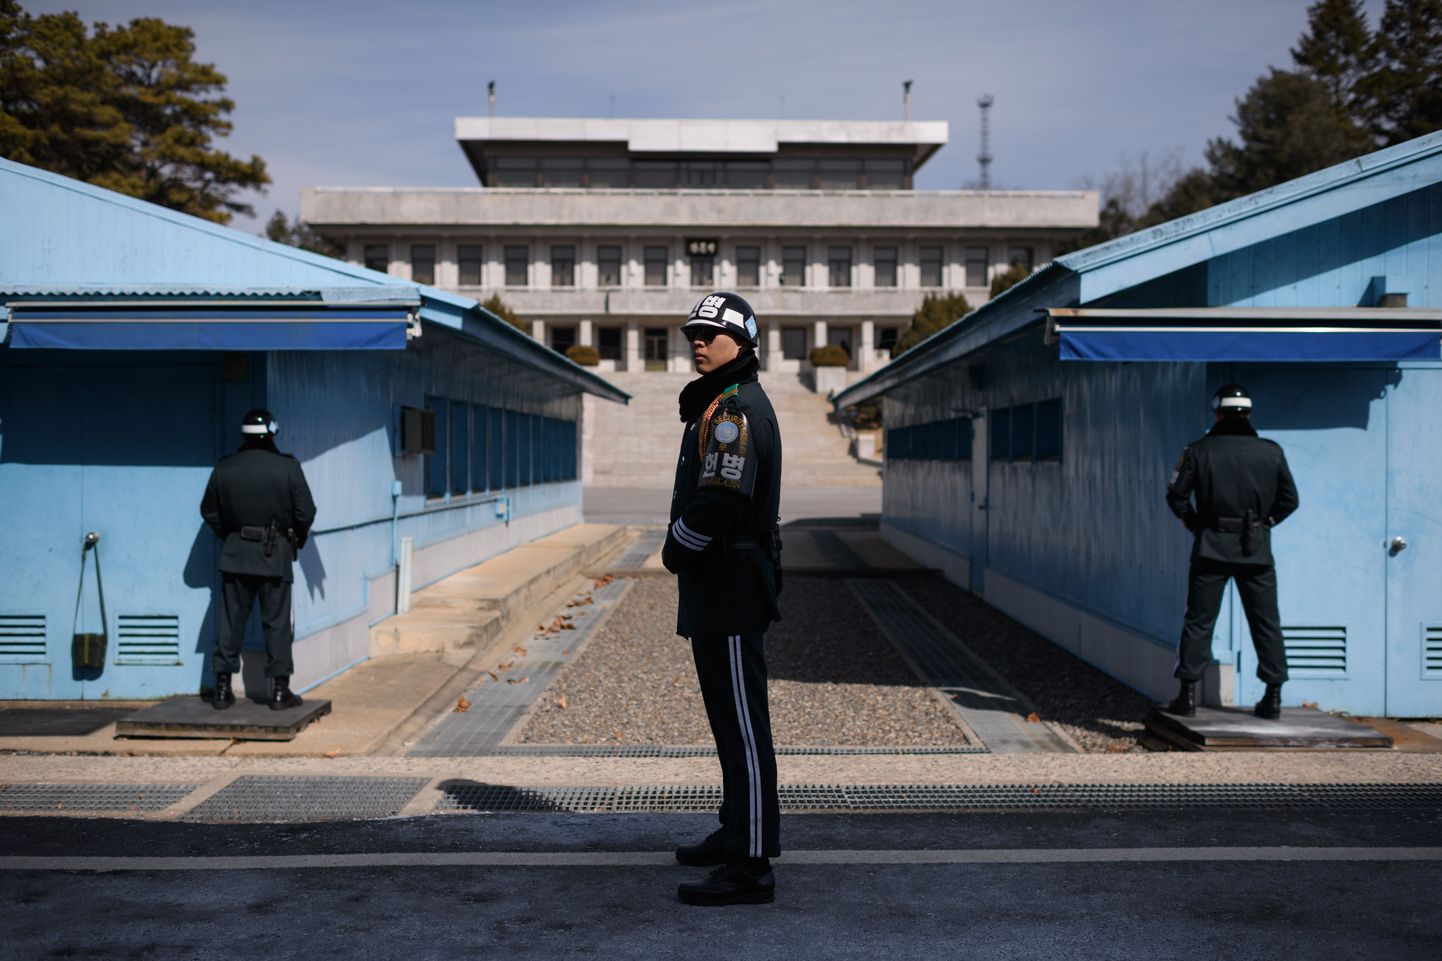 TOPSHOT - A South Korean soldier (C) stands guard before the military demarcation line and North Korea's Panmun Hall, in the truce village of Panmunjom, within the Demilitarized Zone (DMZ) dividing the two Koreas on February 21, 2018. / AFP PHOTO / Ed JONES